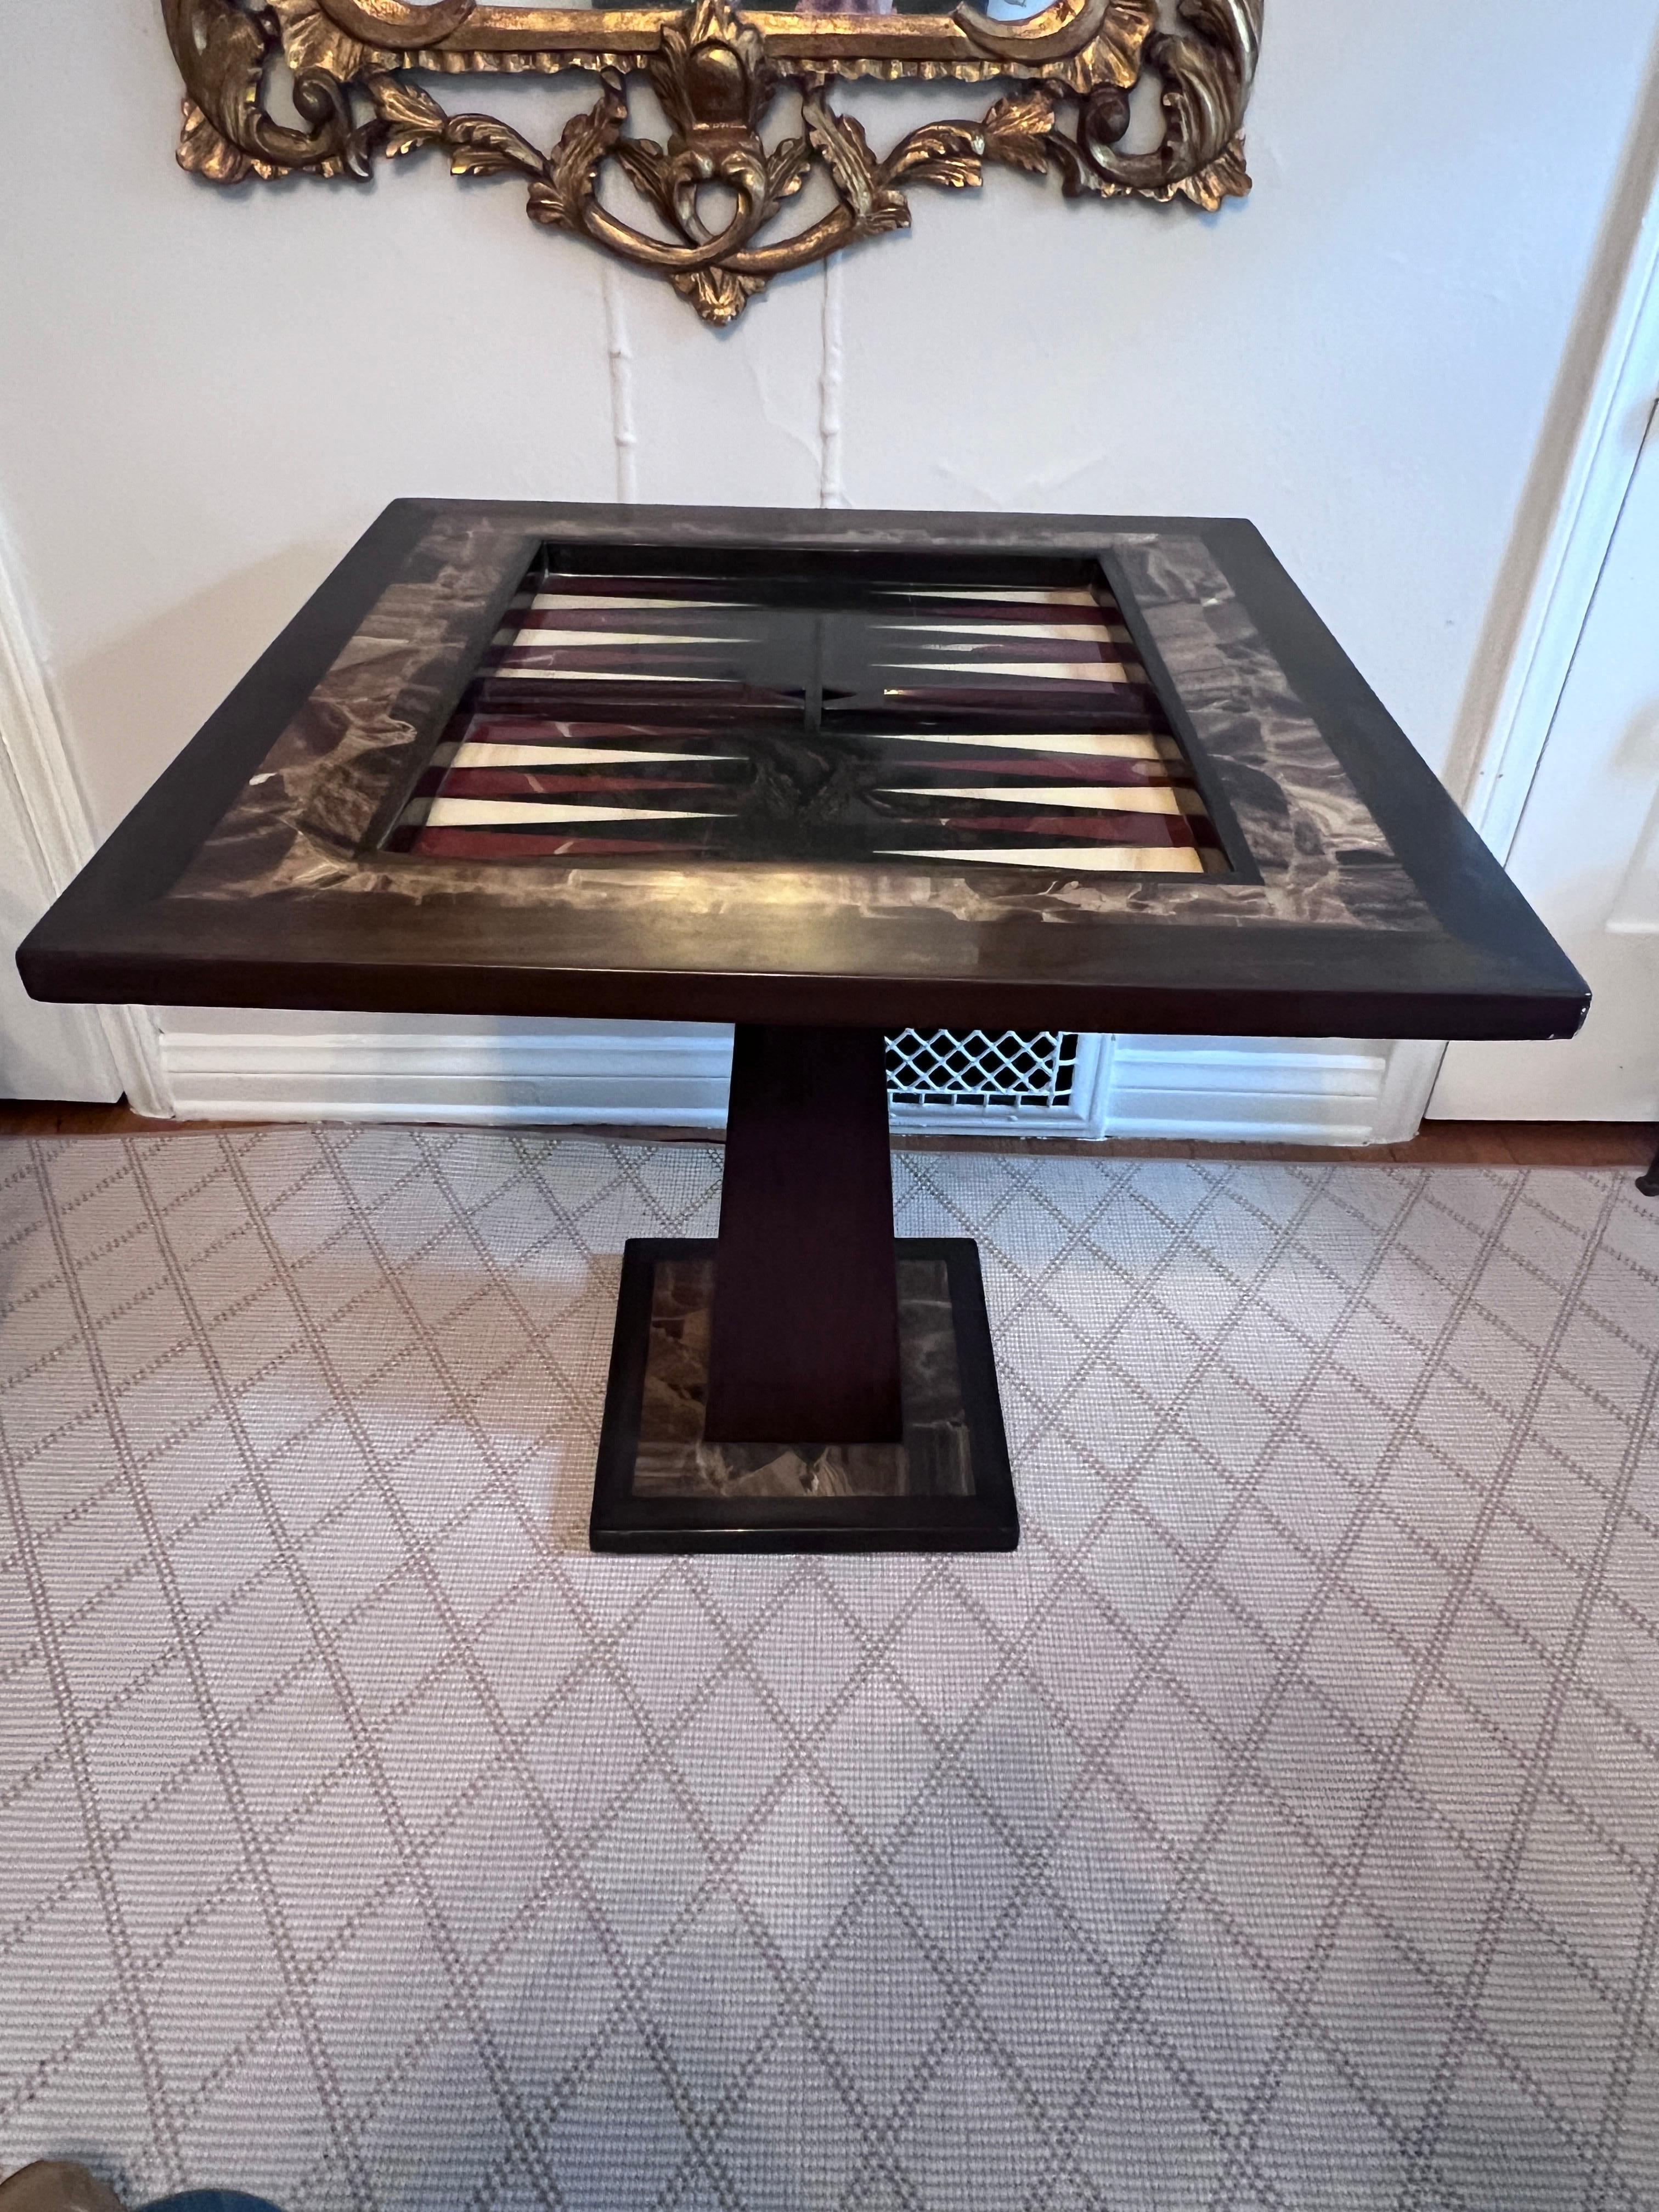 Attributed to Arturo Pani, an Onyx game board with a Walnut surround on top and at the base.  The Table can be a solid Onyx side or center table and hold books, a lamp, and decorative accessories.

When the Onyx top is Flipped it becomes a checker